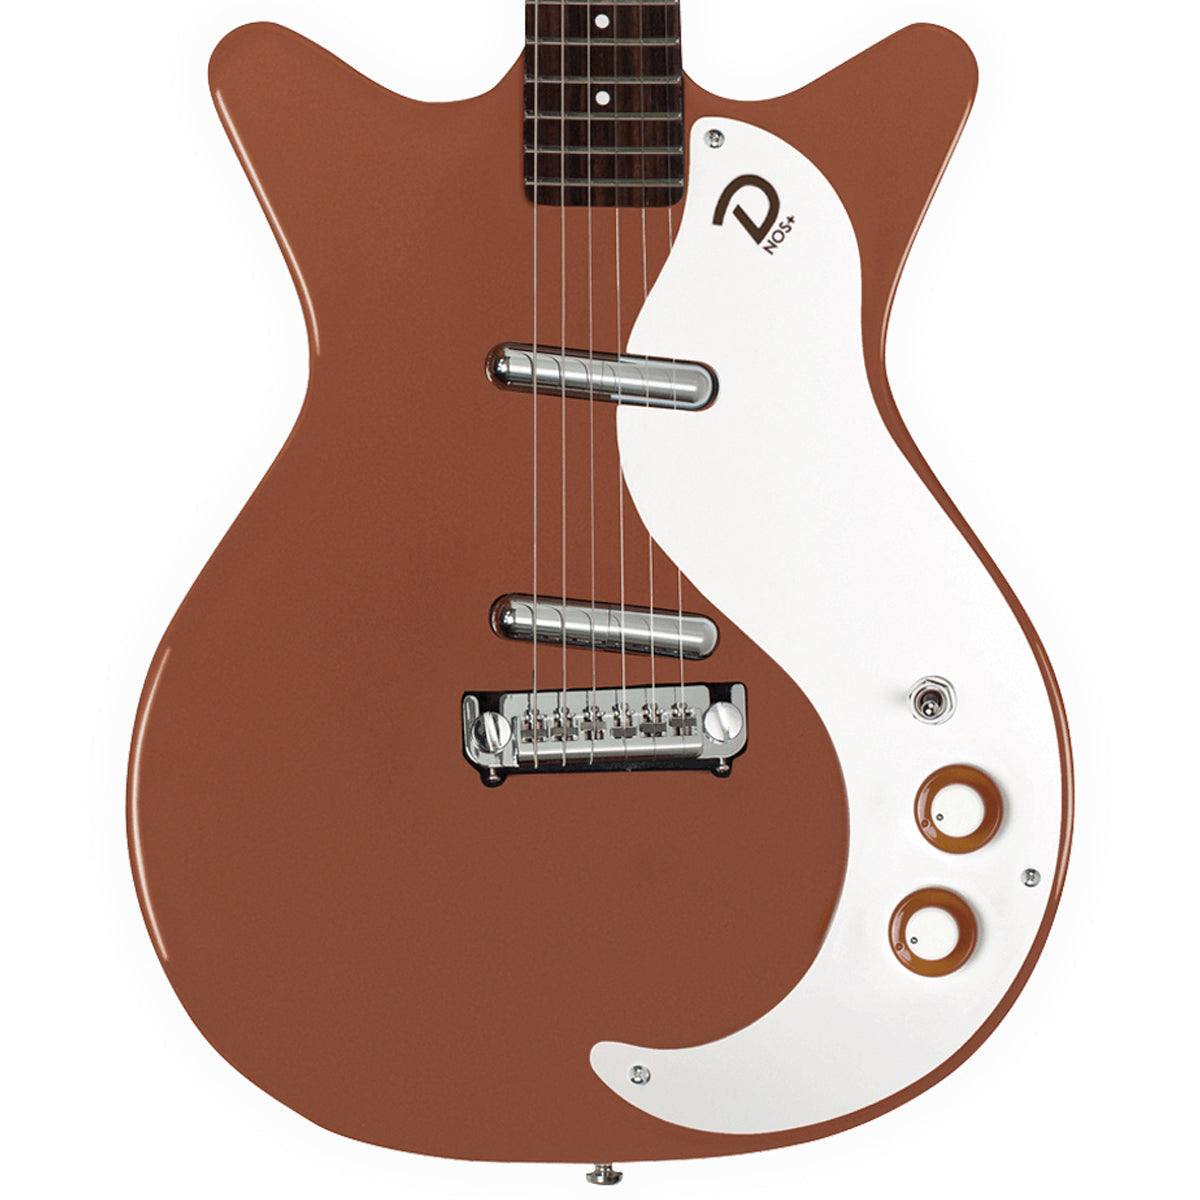 Danelectro '59M NOS+ Electric Guitar ~ Copper, Electric Guitar for sale at Richards Guitars.